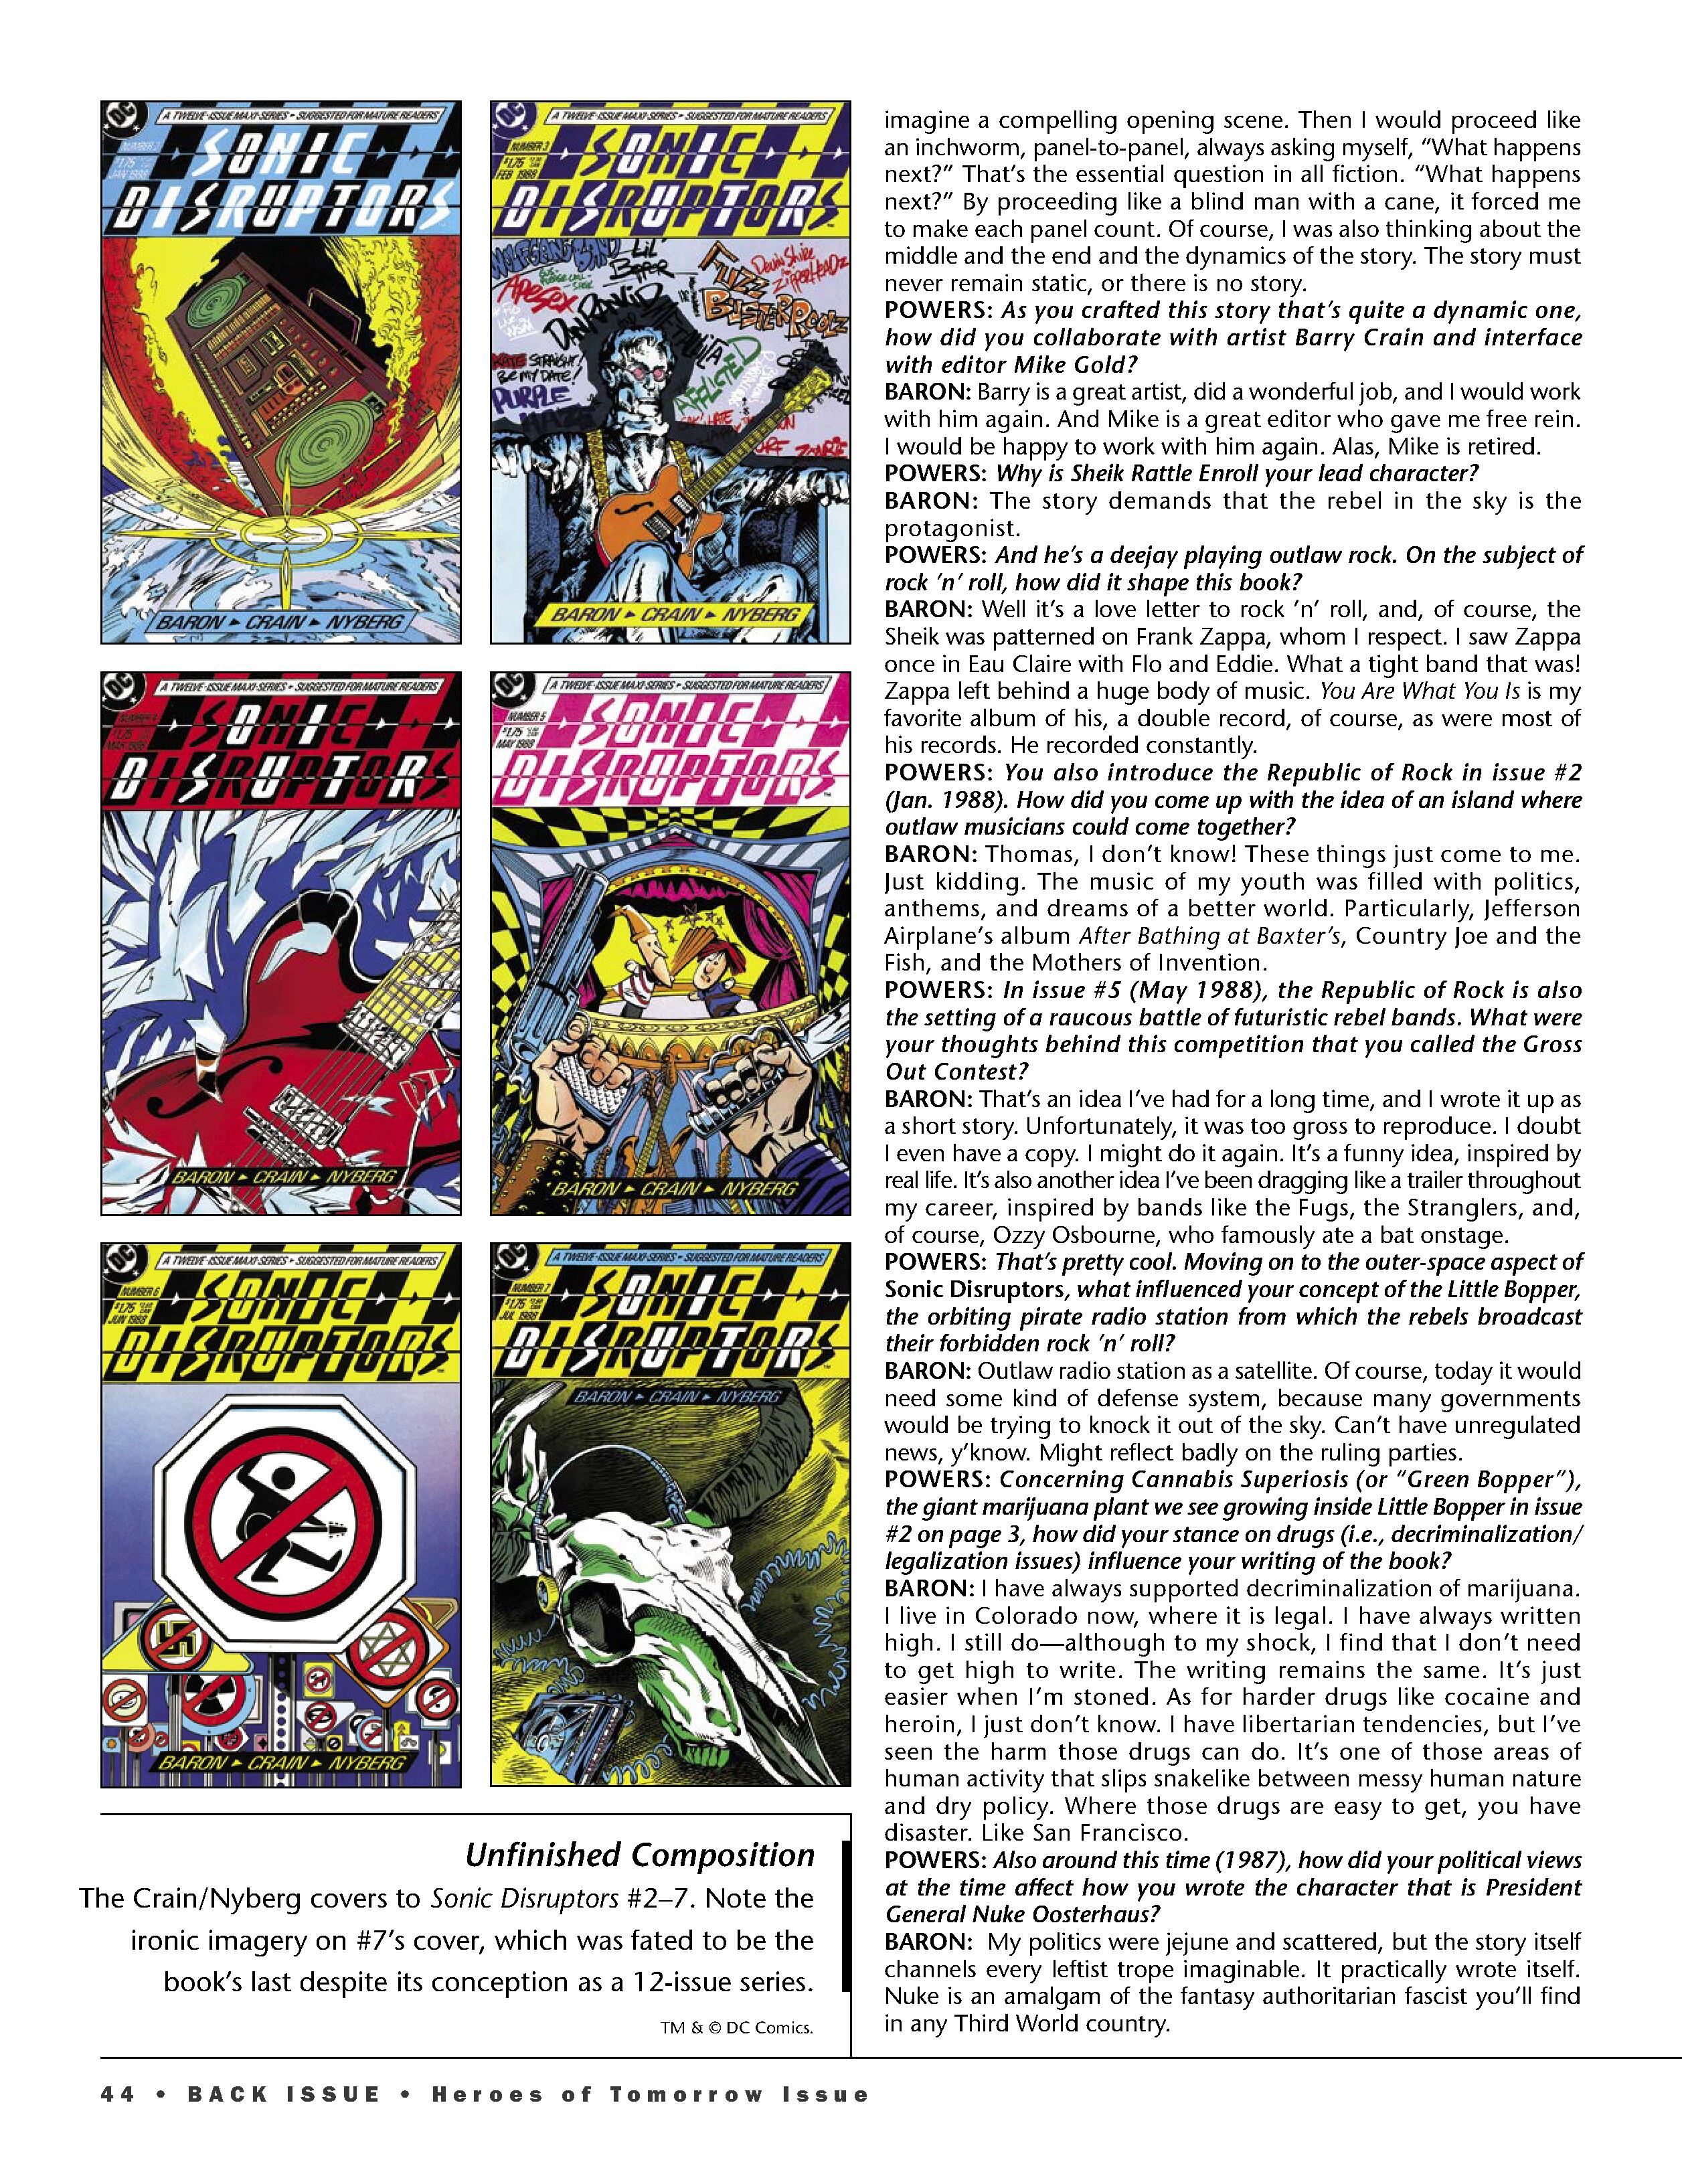 Read online Back Issue comic -  Issue #120 - 46